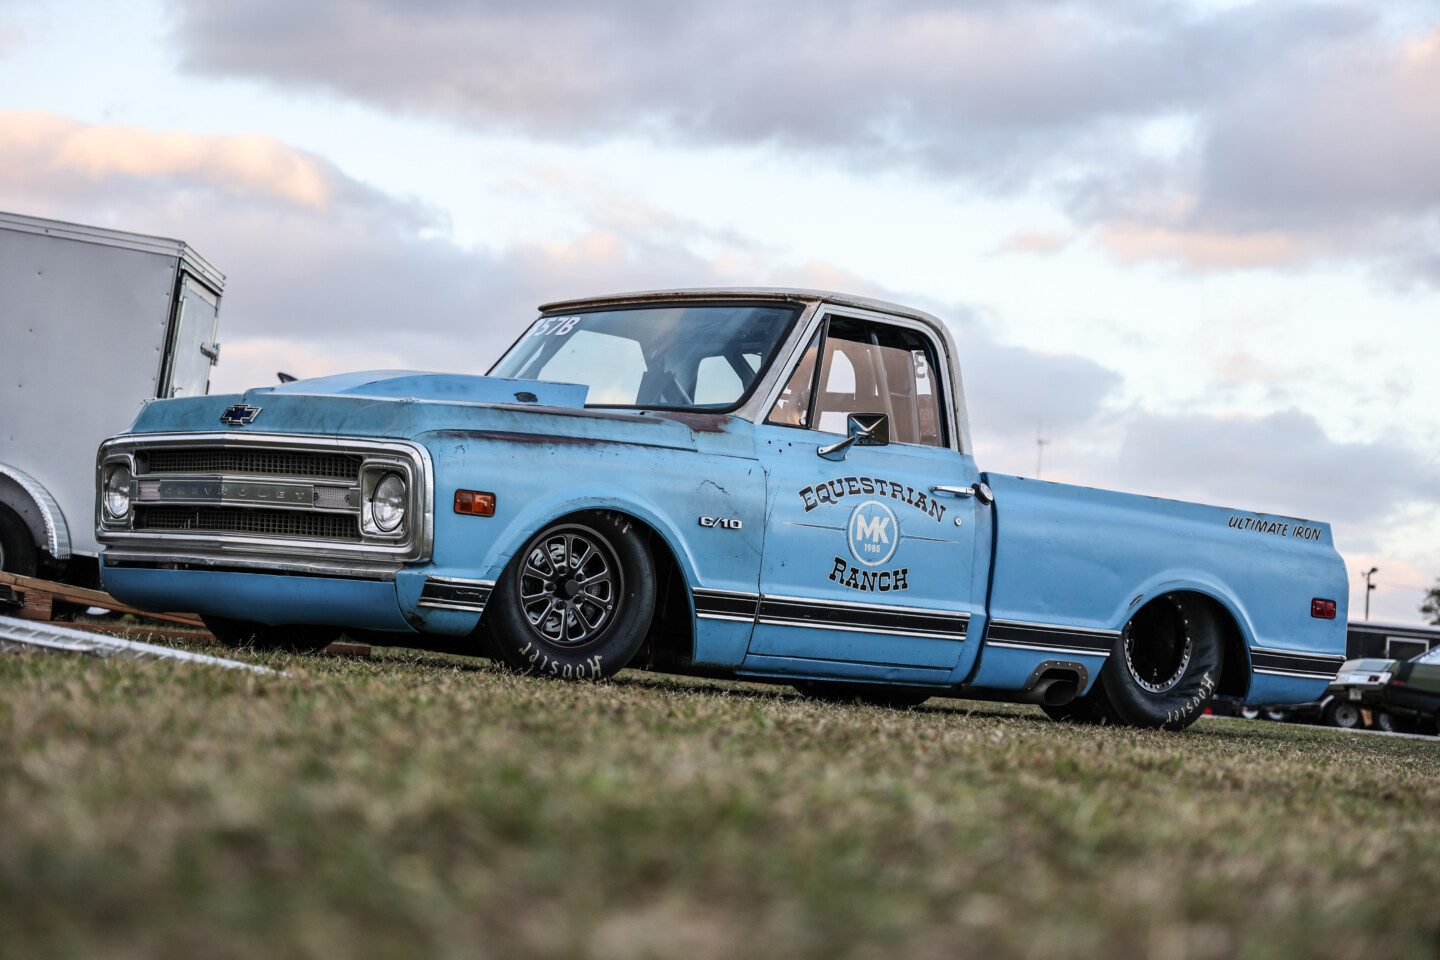 Mike Clift's C10 Serves Up Horsepower From Farm To Drag Strip